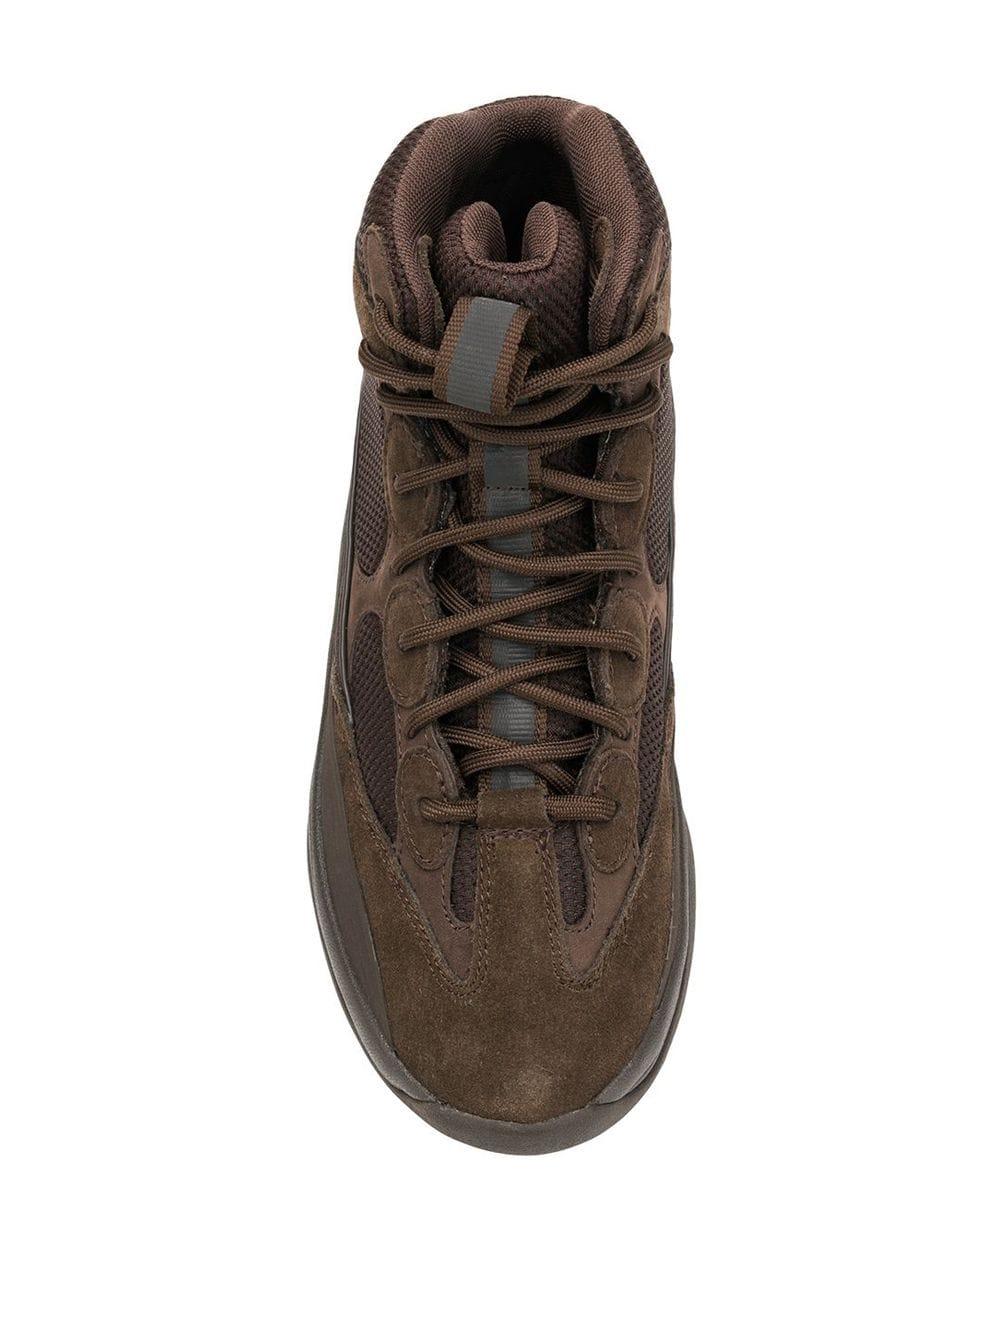 yeezy brown boots